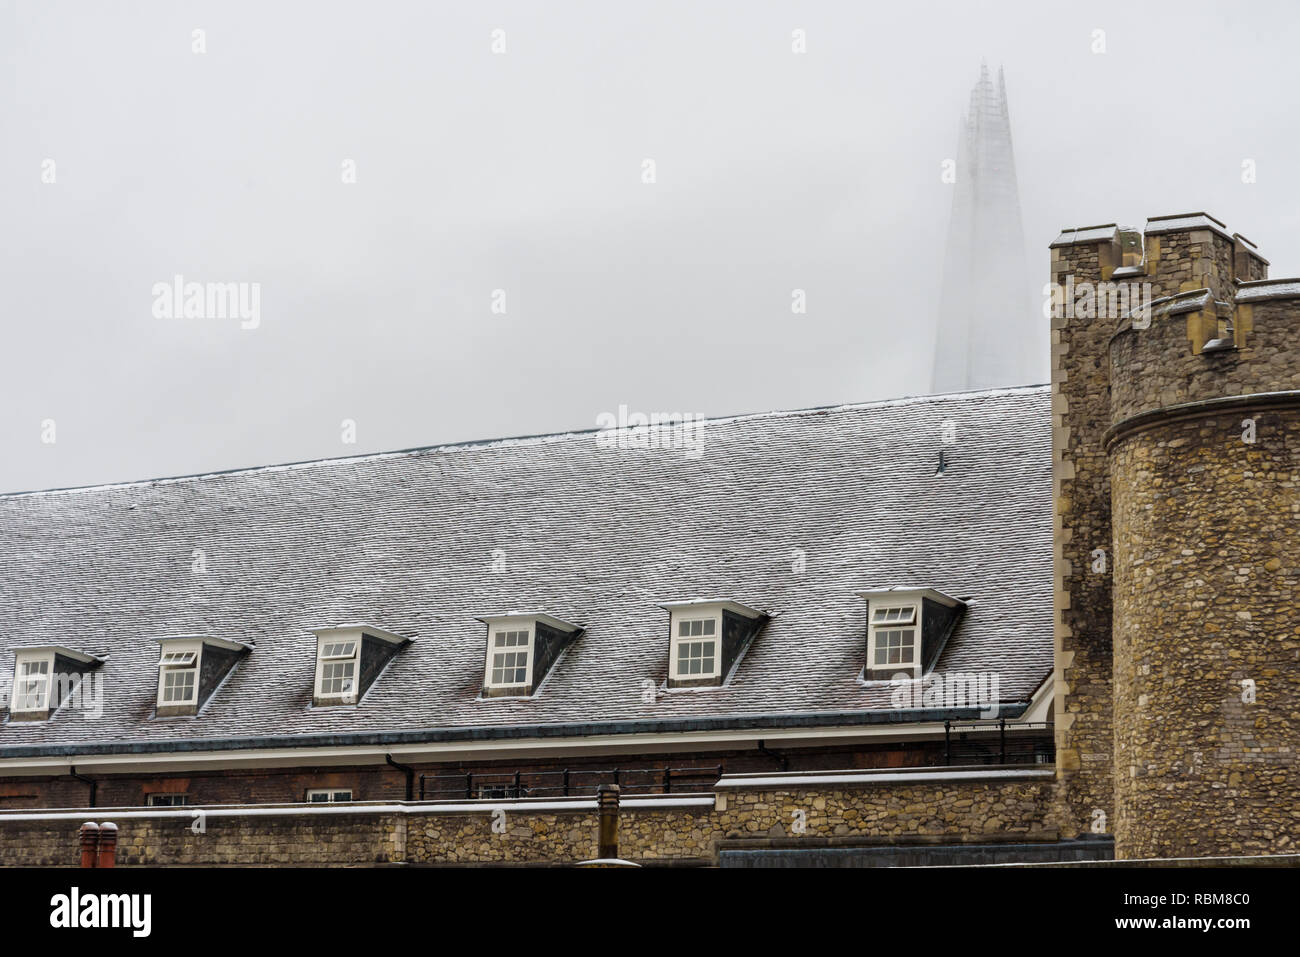 Snow in London. The roofs of Tower of London covered in fresh white snow. In the background the Shard, the tallest skyscraper in Europe. Stock Photo